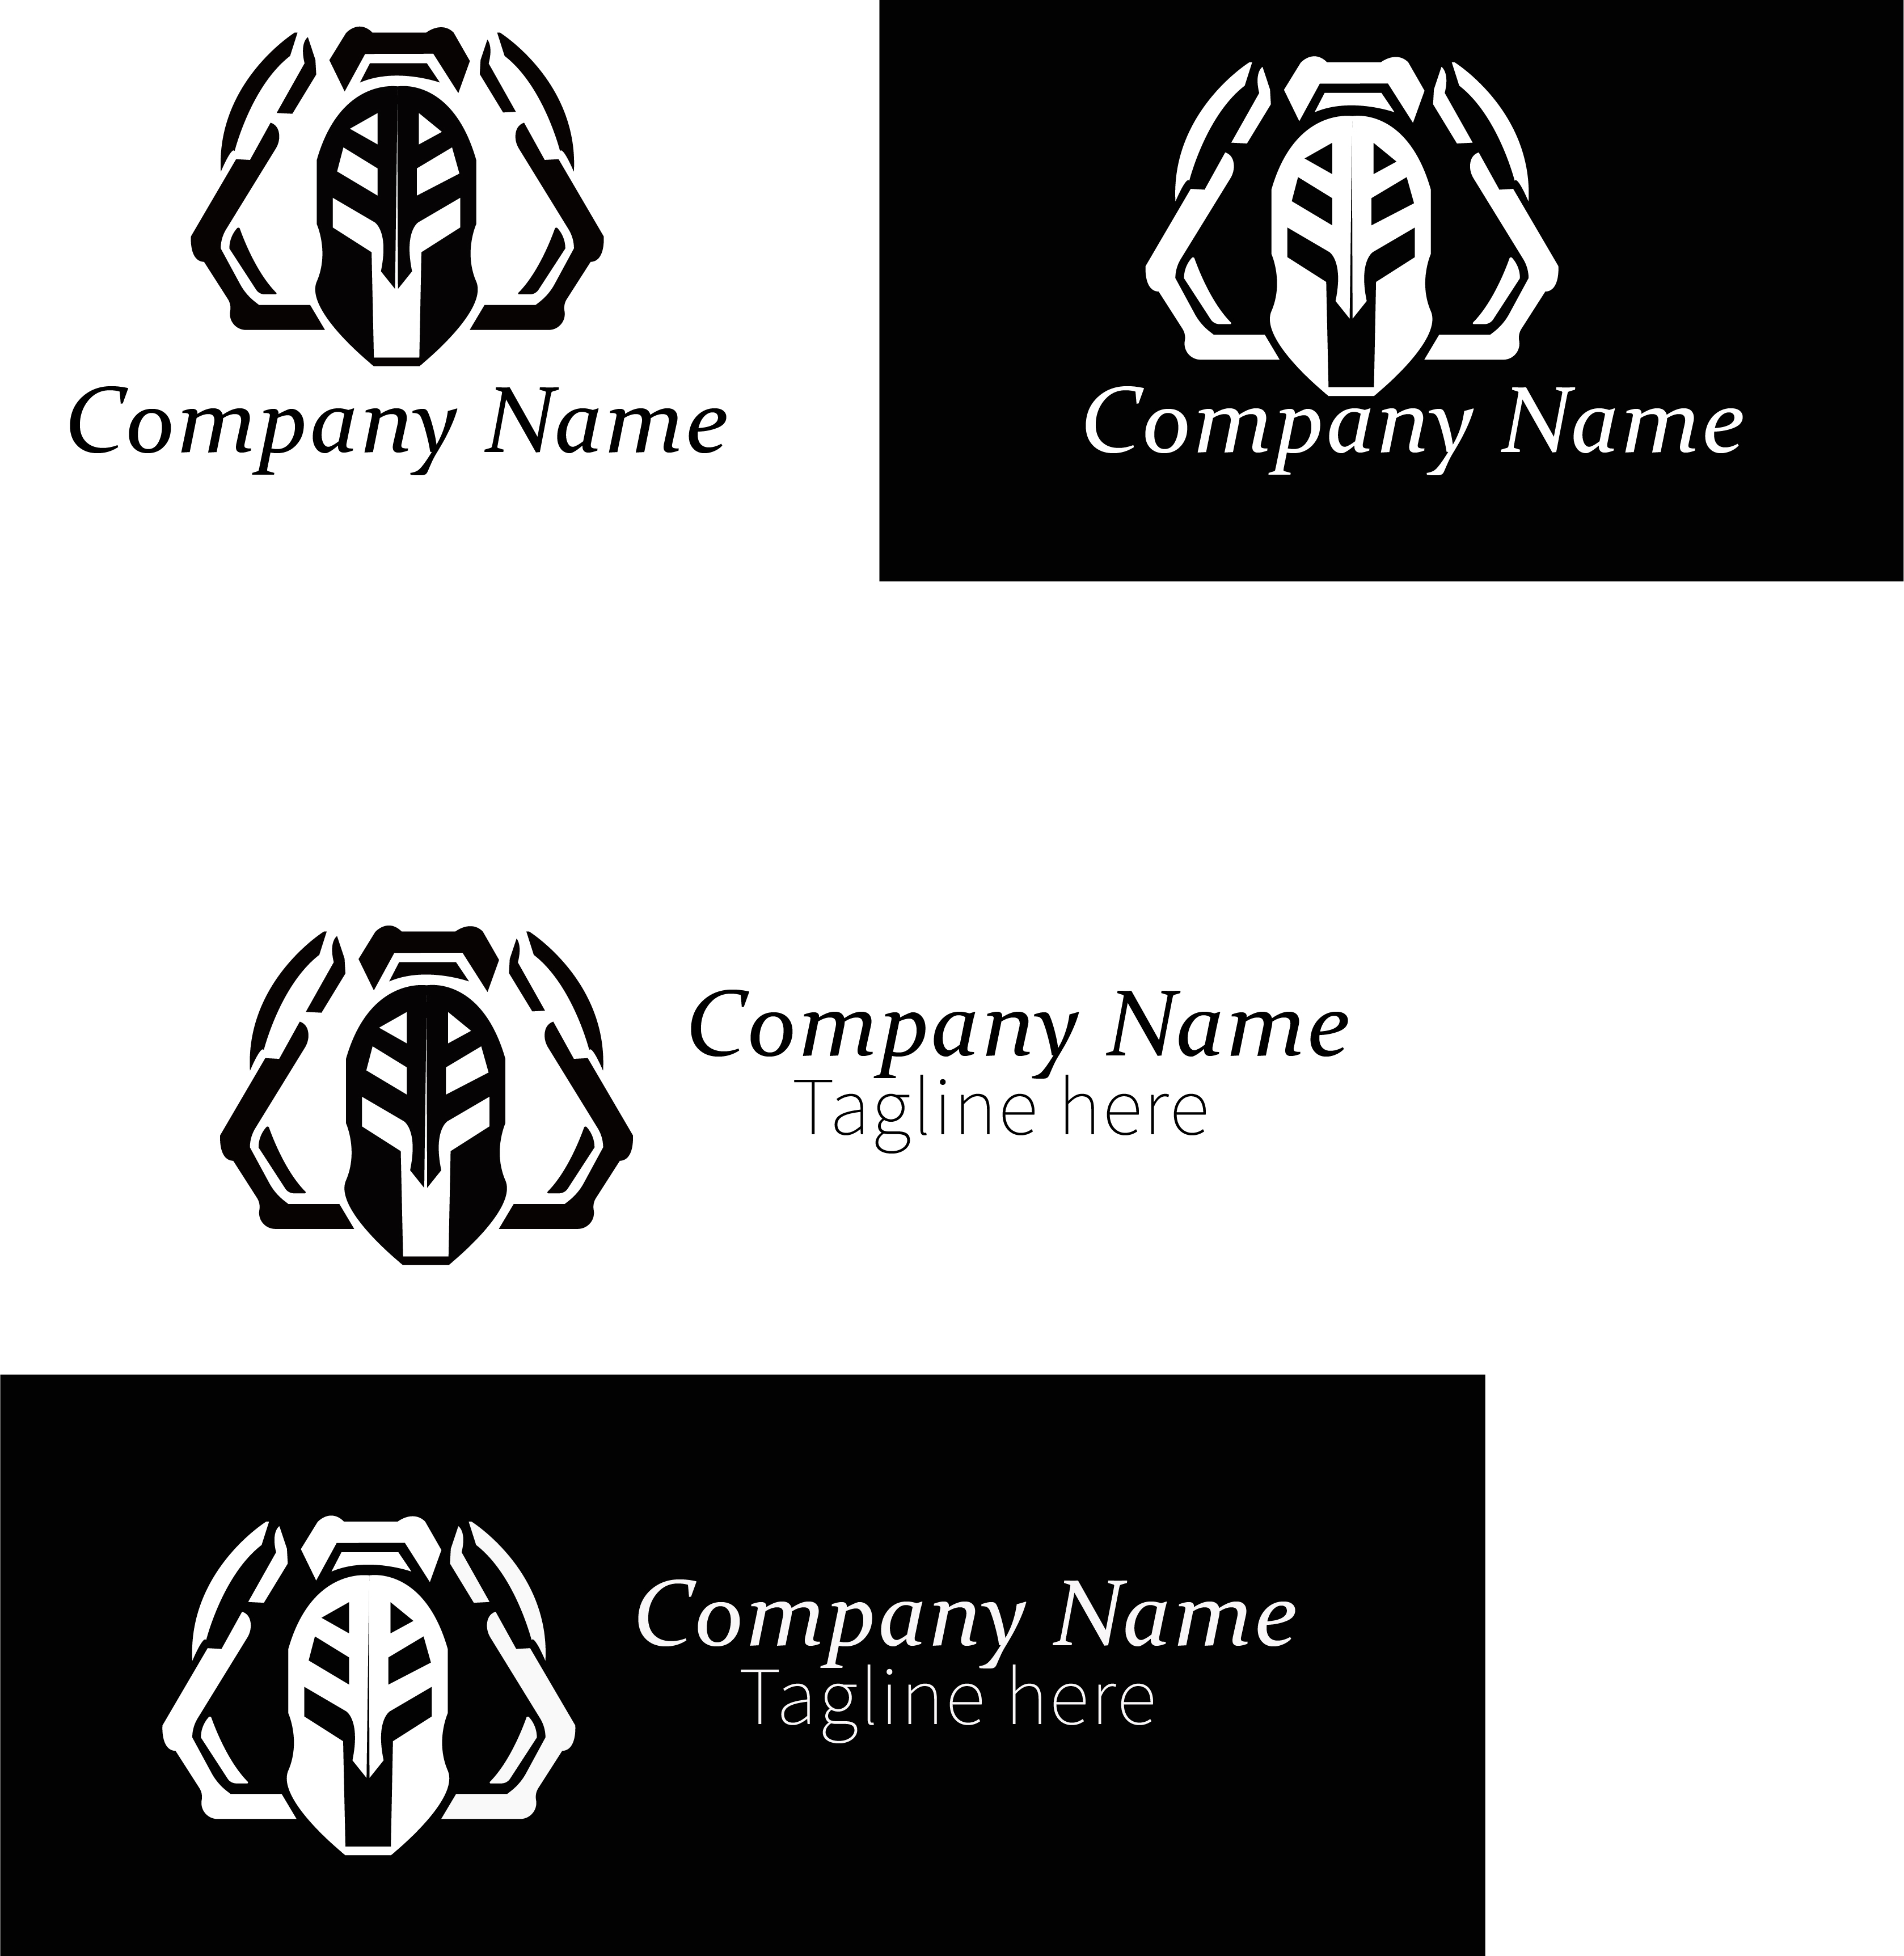 I will design Professional, Modern and unique logo for your Brand